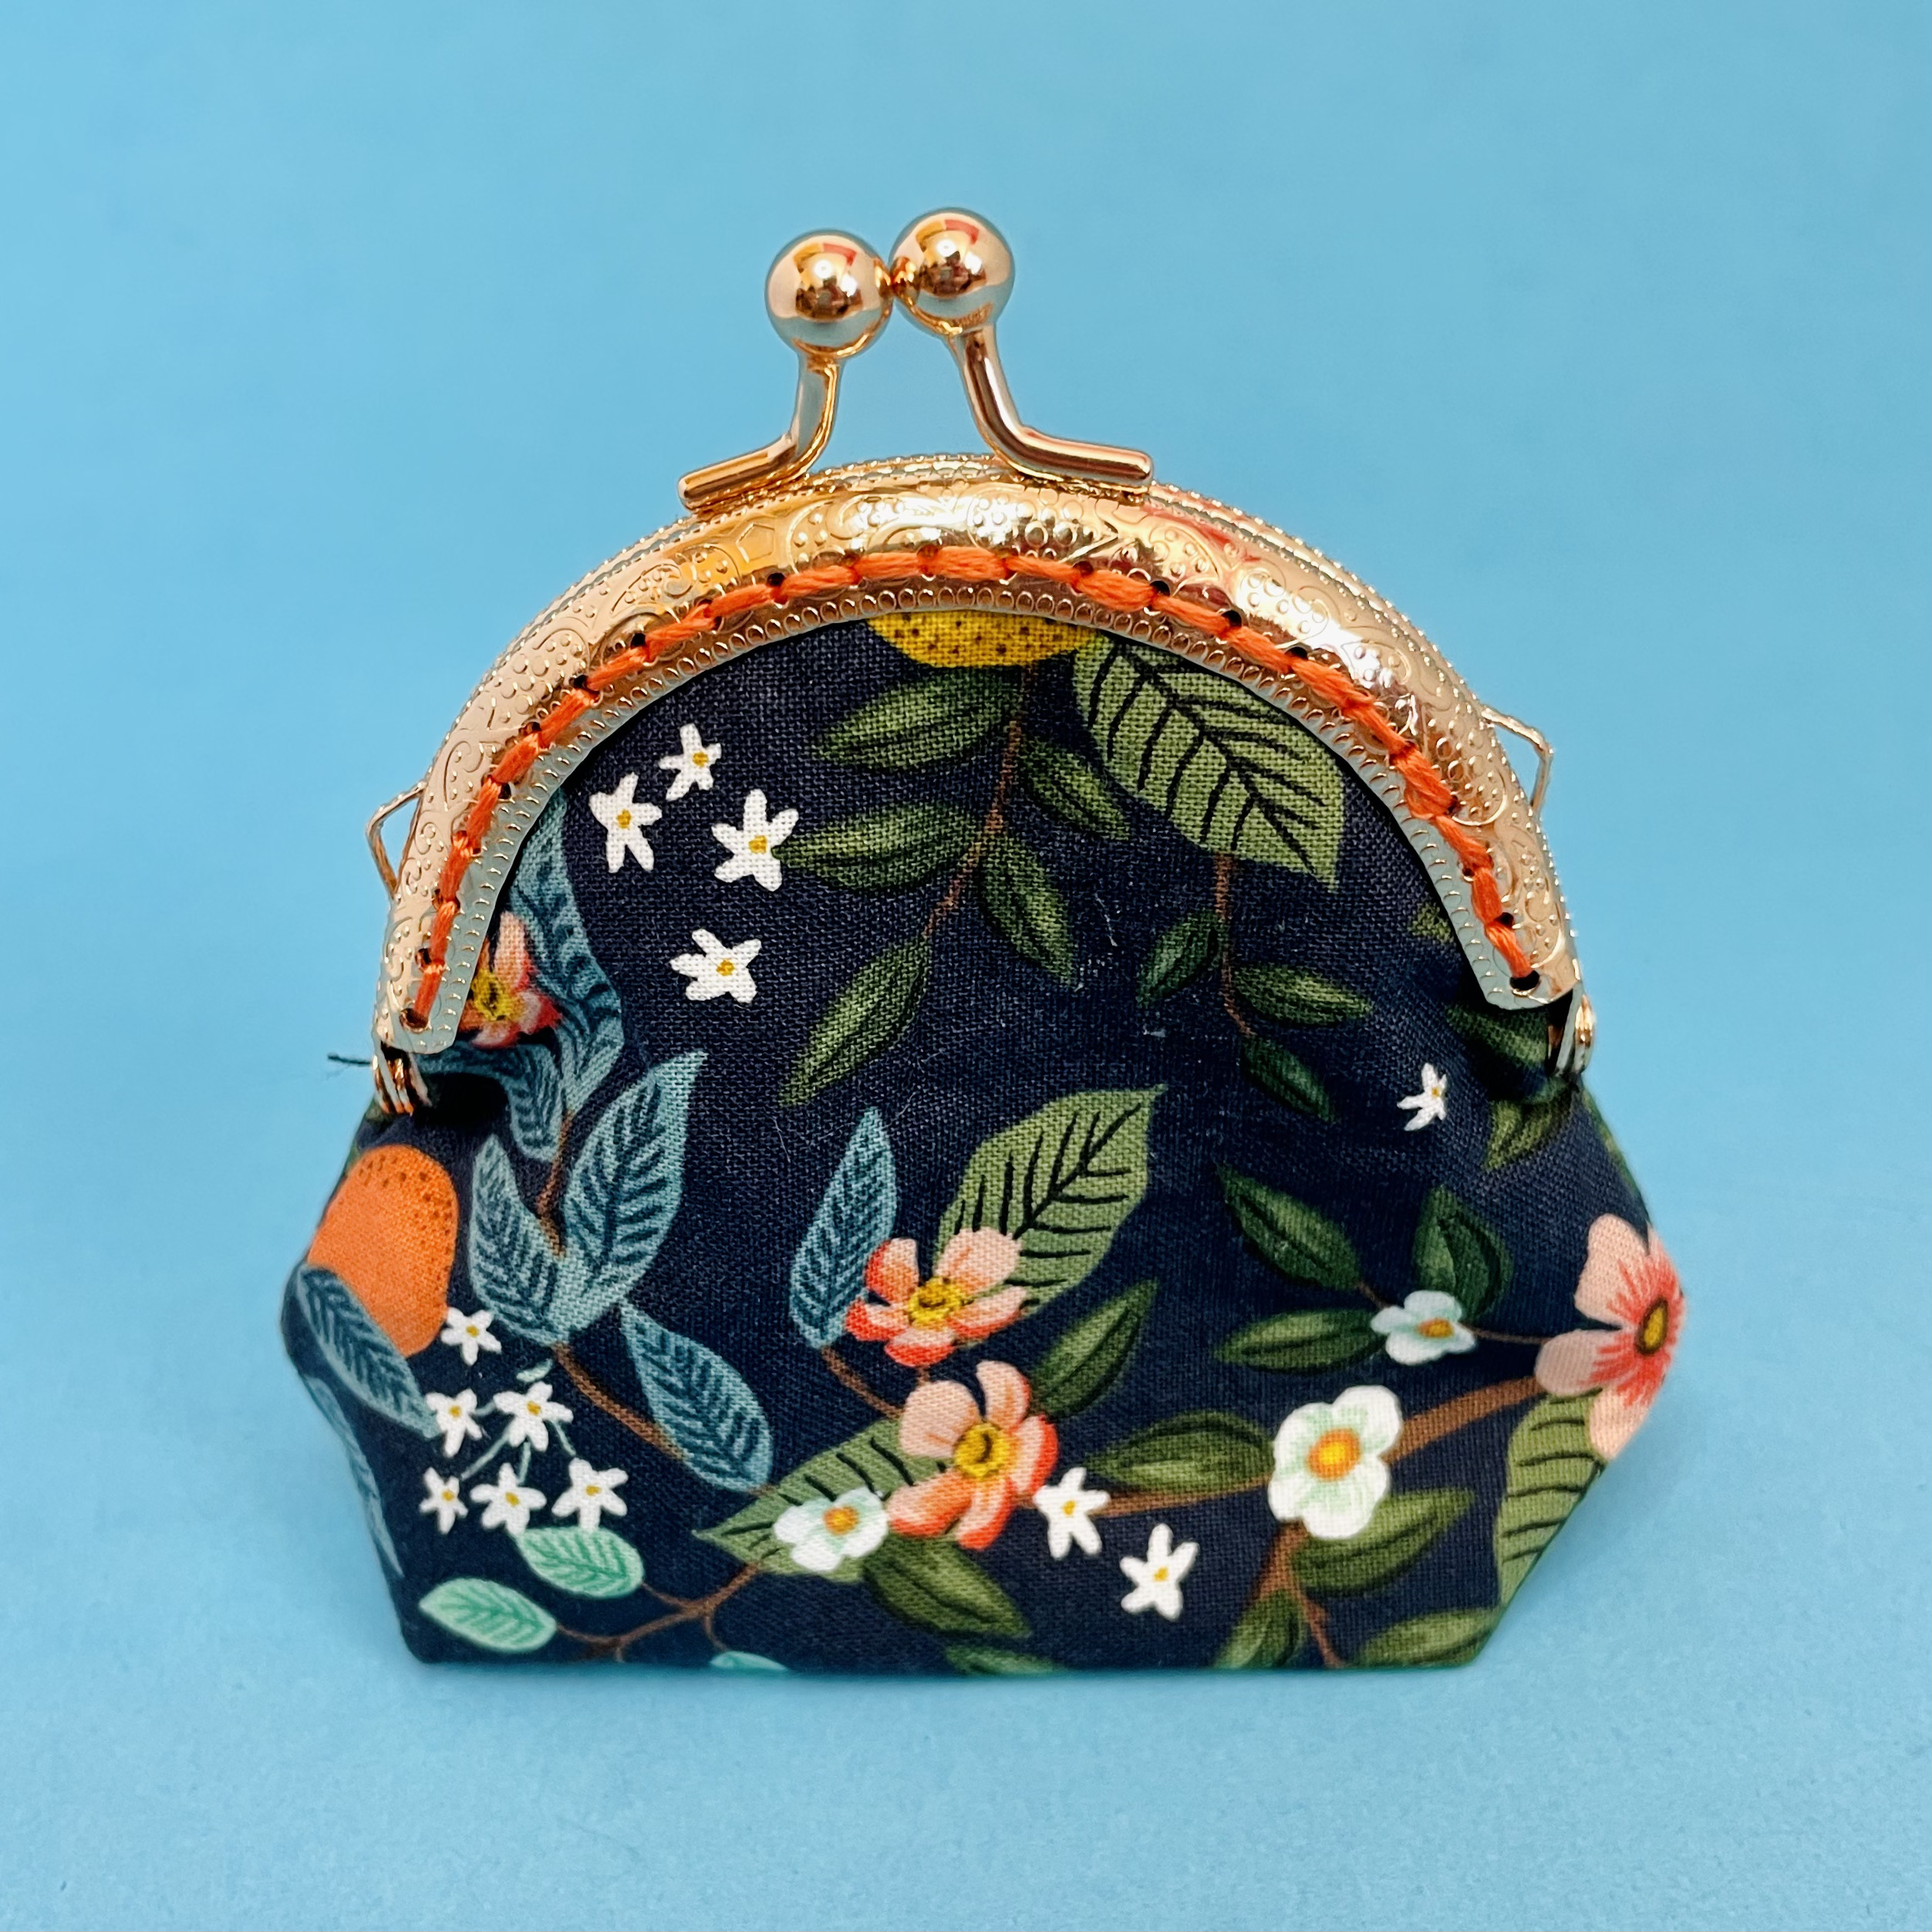 Coin Purse with dark green with a floral print. Lemons, oranges and light green blossoms.